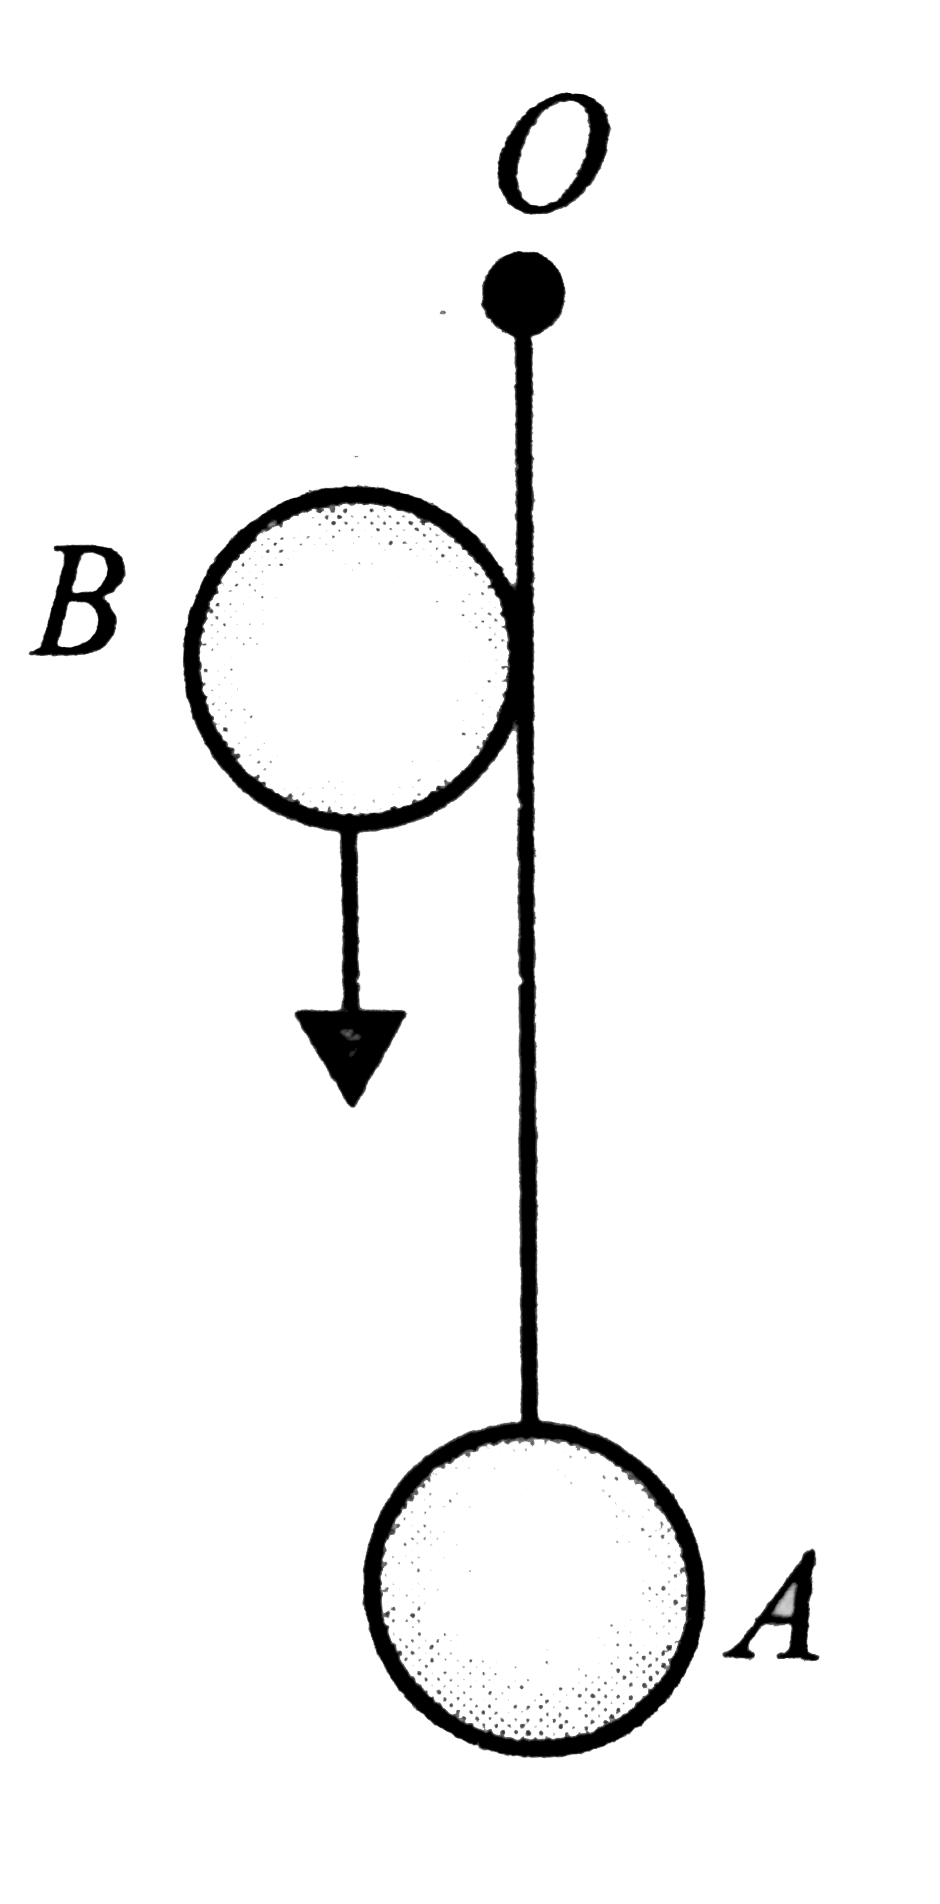 A small steel ball A is suspended by an inextensible thread of length l= 1.5 m from O. Another identical ball is thrown vertically downwards such that its surface remains just in contact with thread during downward motion and collides elastically with the suspended ball. If the suspended ball just completes vertical circle after collision, calculate the velocity (in cm//s) of the falling ball just before collision (g = 10 m s^(-2)).